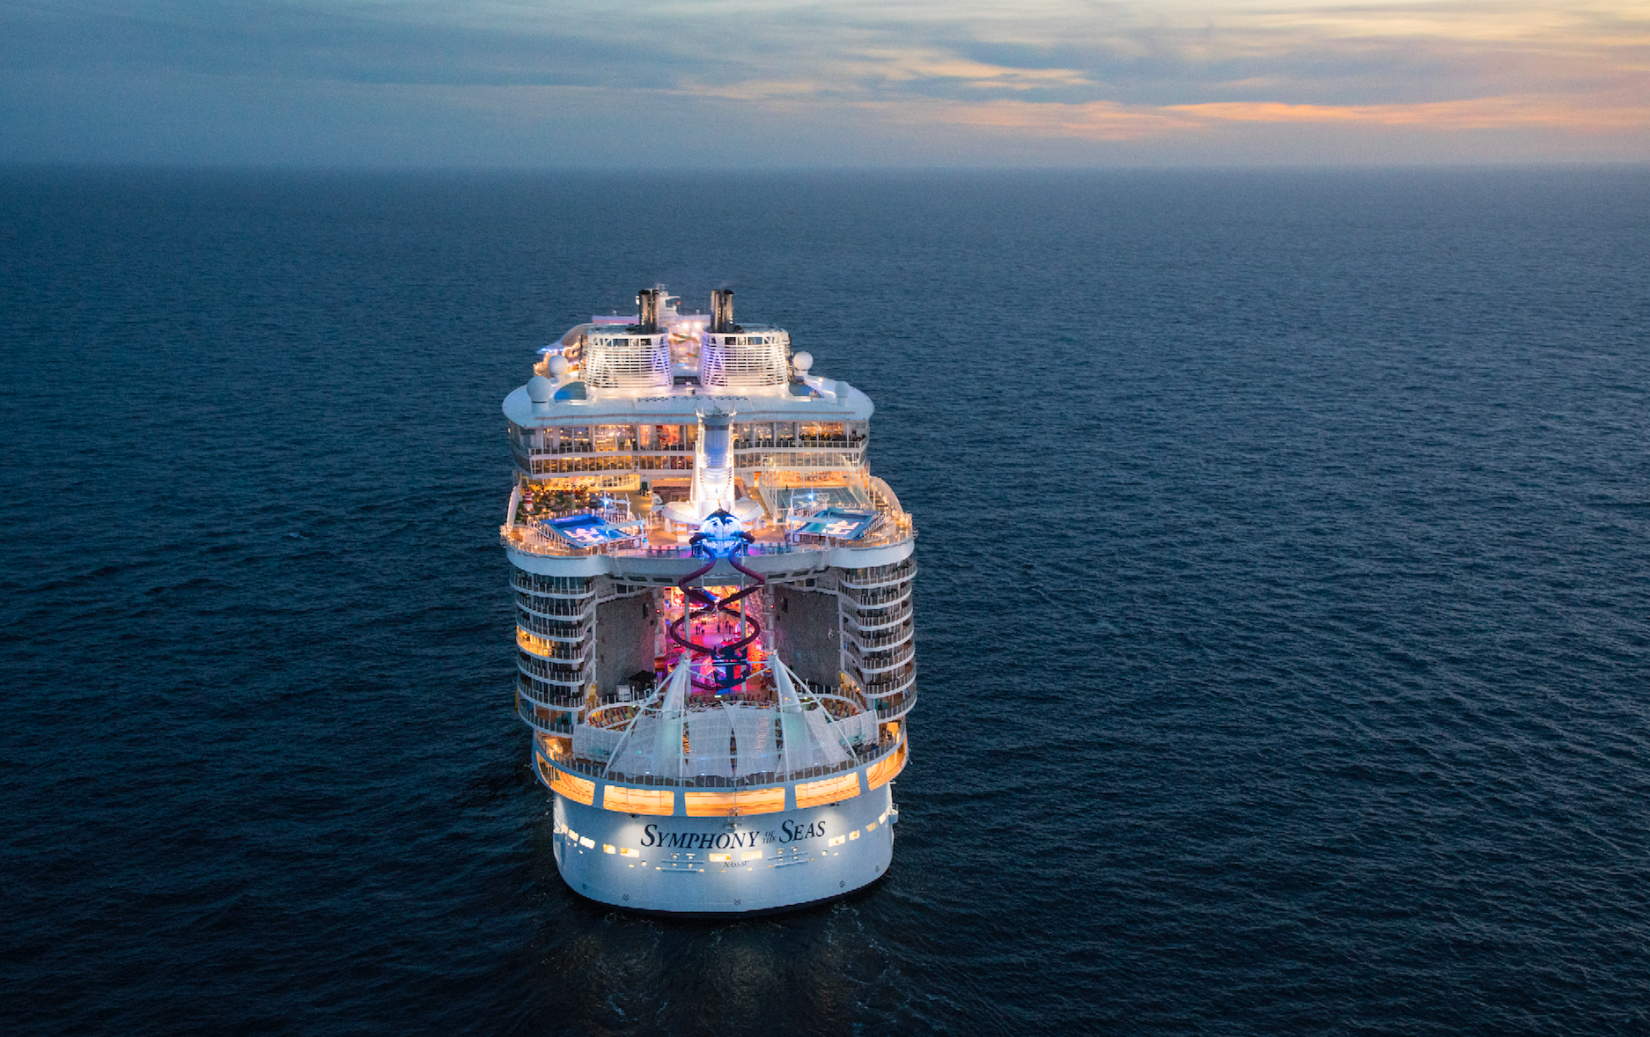 Symphony Of The Seas / Royal Caribbean Announces What's Likely Another